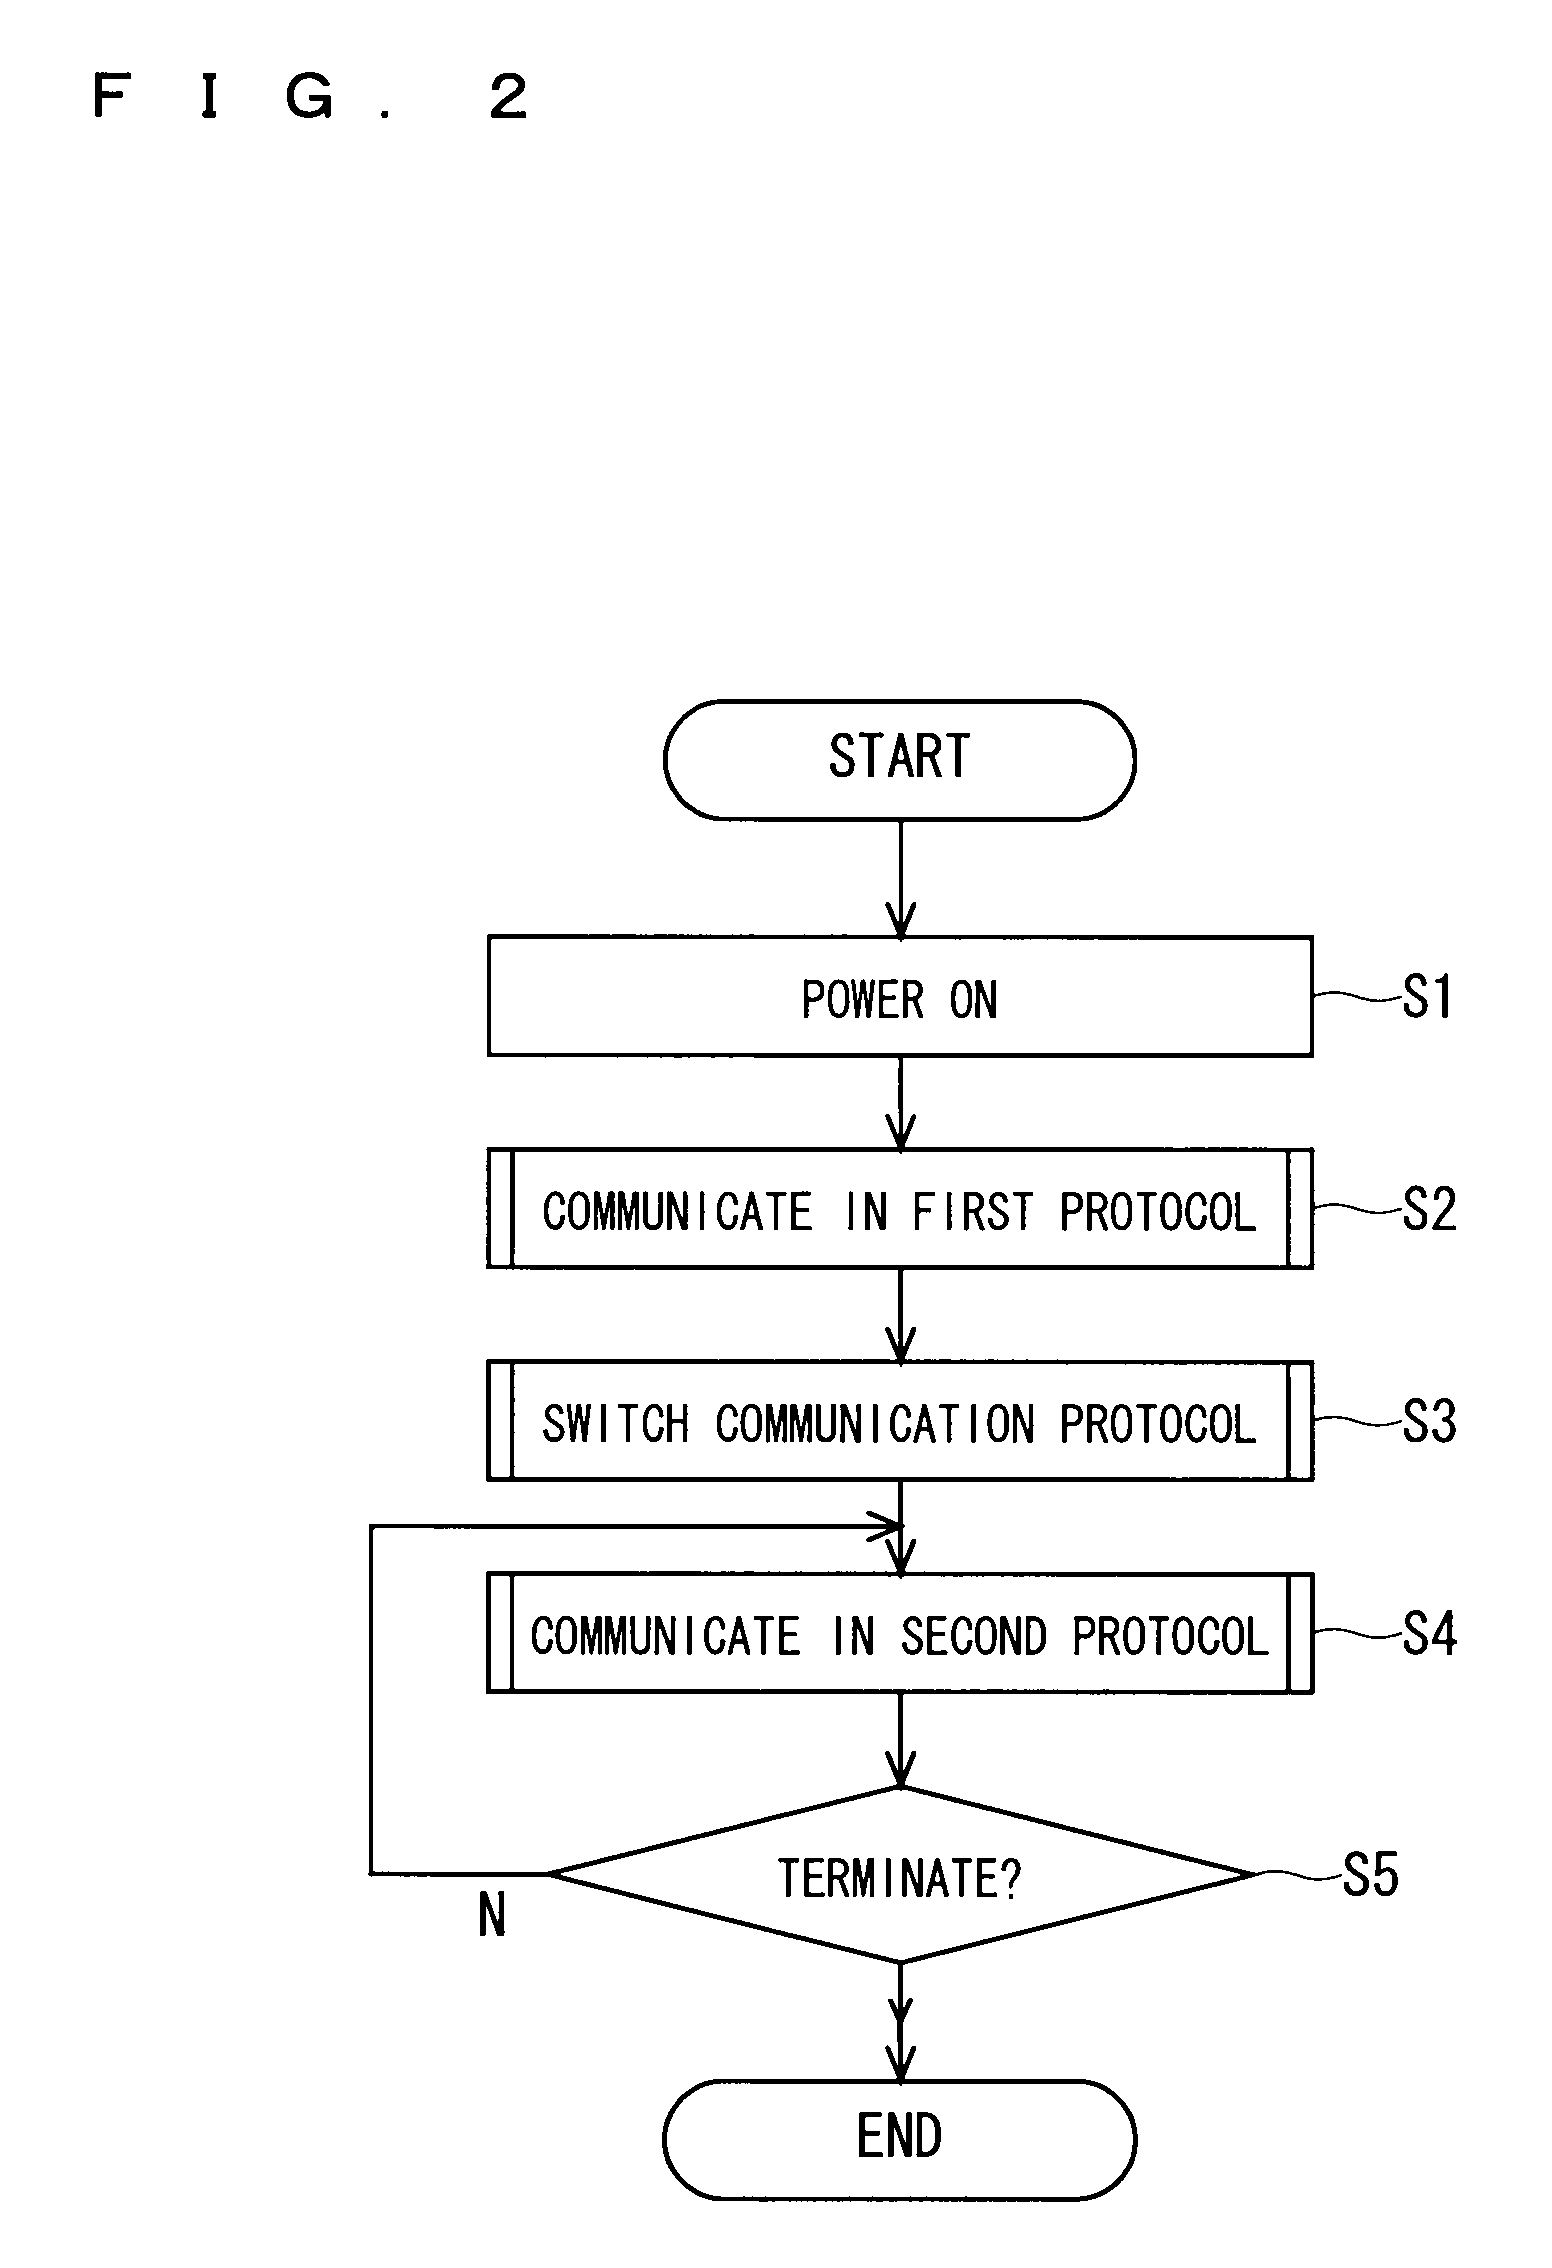 Memory control device, semiconductor memory device, memory system, and memory control method